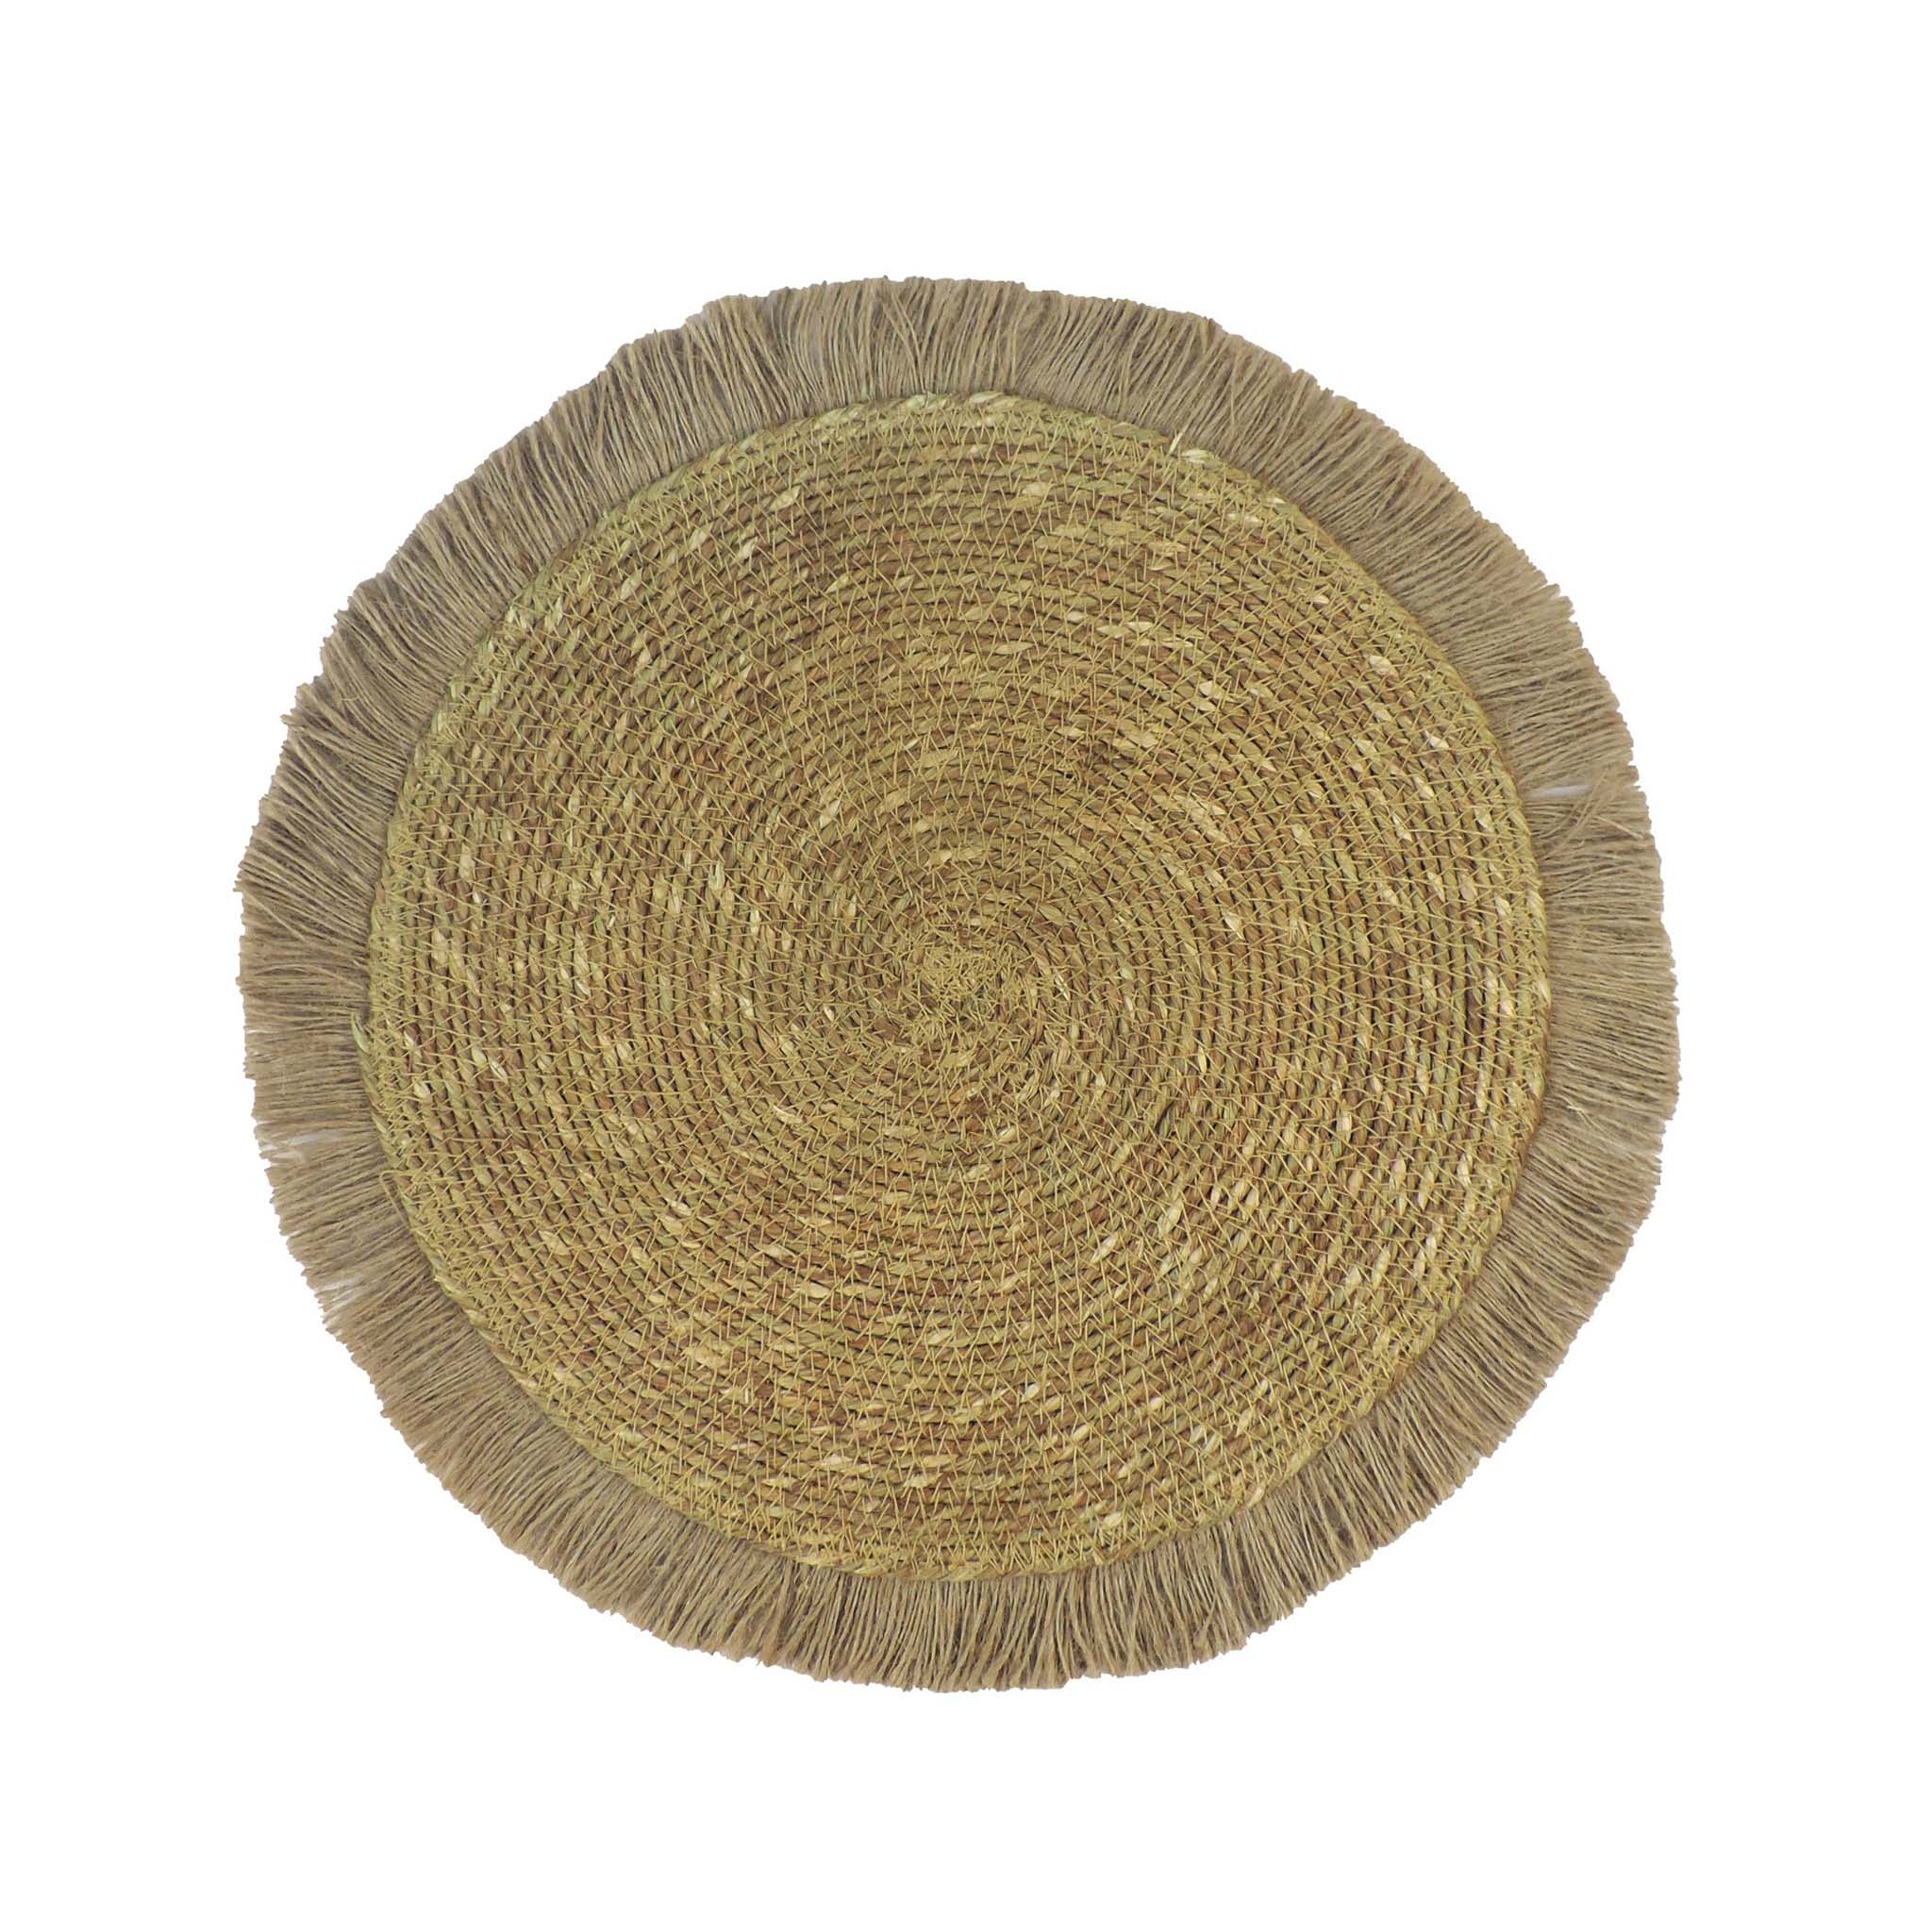 Jute Fringed Edge Placemat<br>Size: 14" Round<br>Set of 2/4<br>Color: Natural